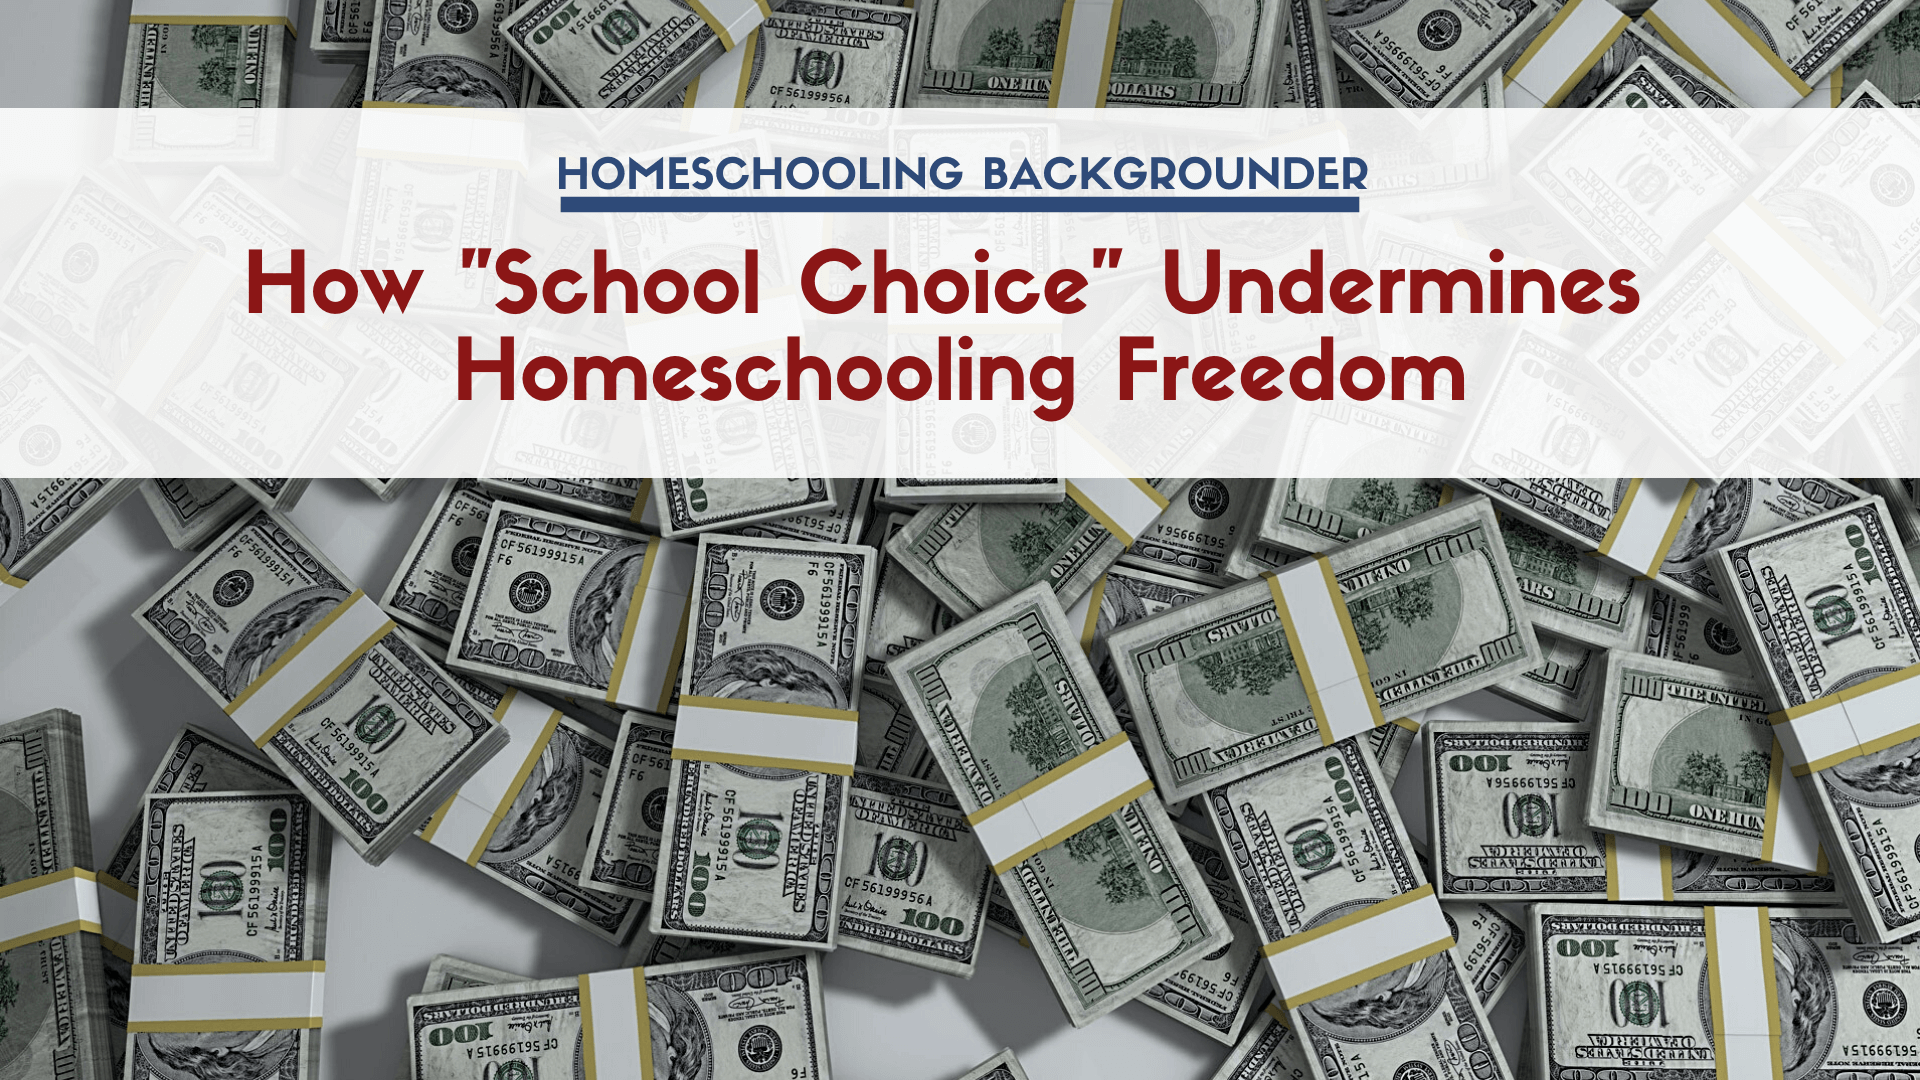 Good Research about Homeschooling graphic